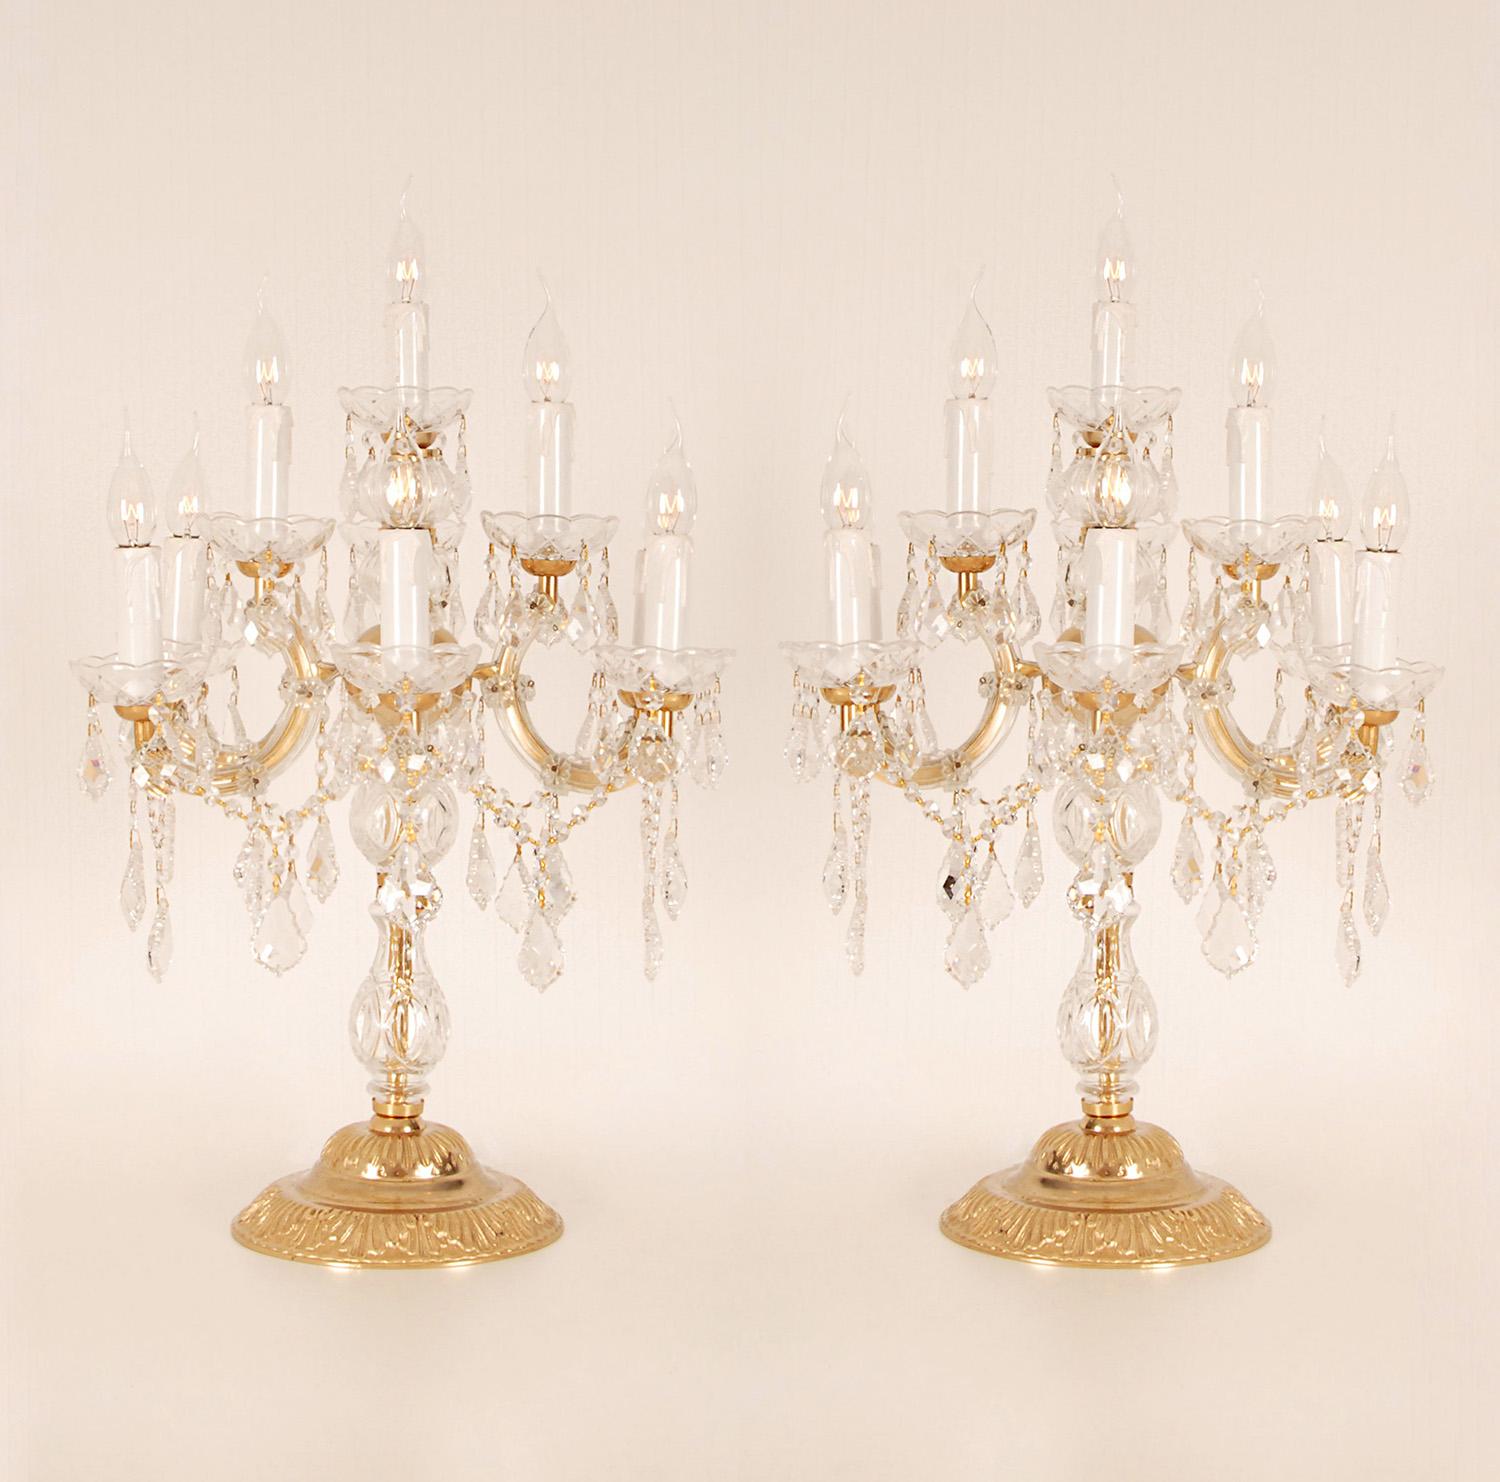 Vintage High End Tall 10 light Table Chandeliers - Palacy lamps
Material: Crystall, gold gilded bronze, Blown glass
Design: Palacy style In the manner of Baguès, Baccarat, Murano, Venice glass, Banci Firenze
Style: Marie Therese, Empire, Rococo,